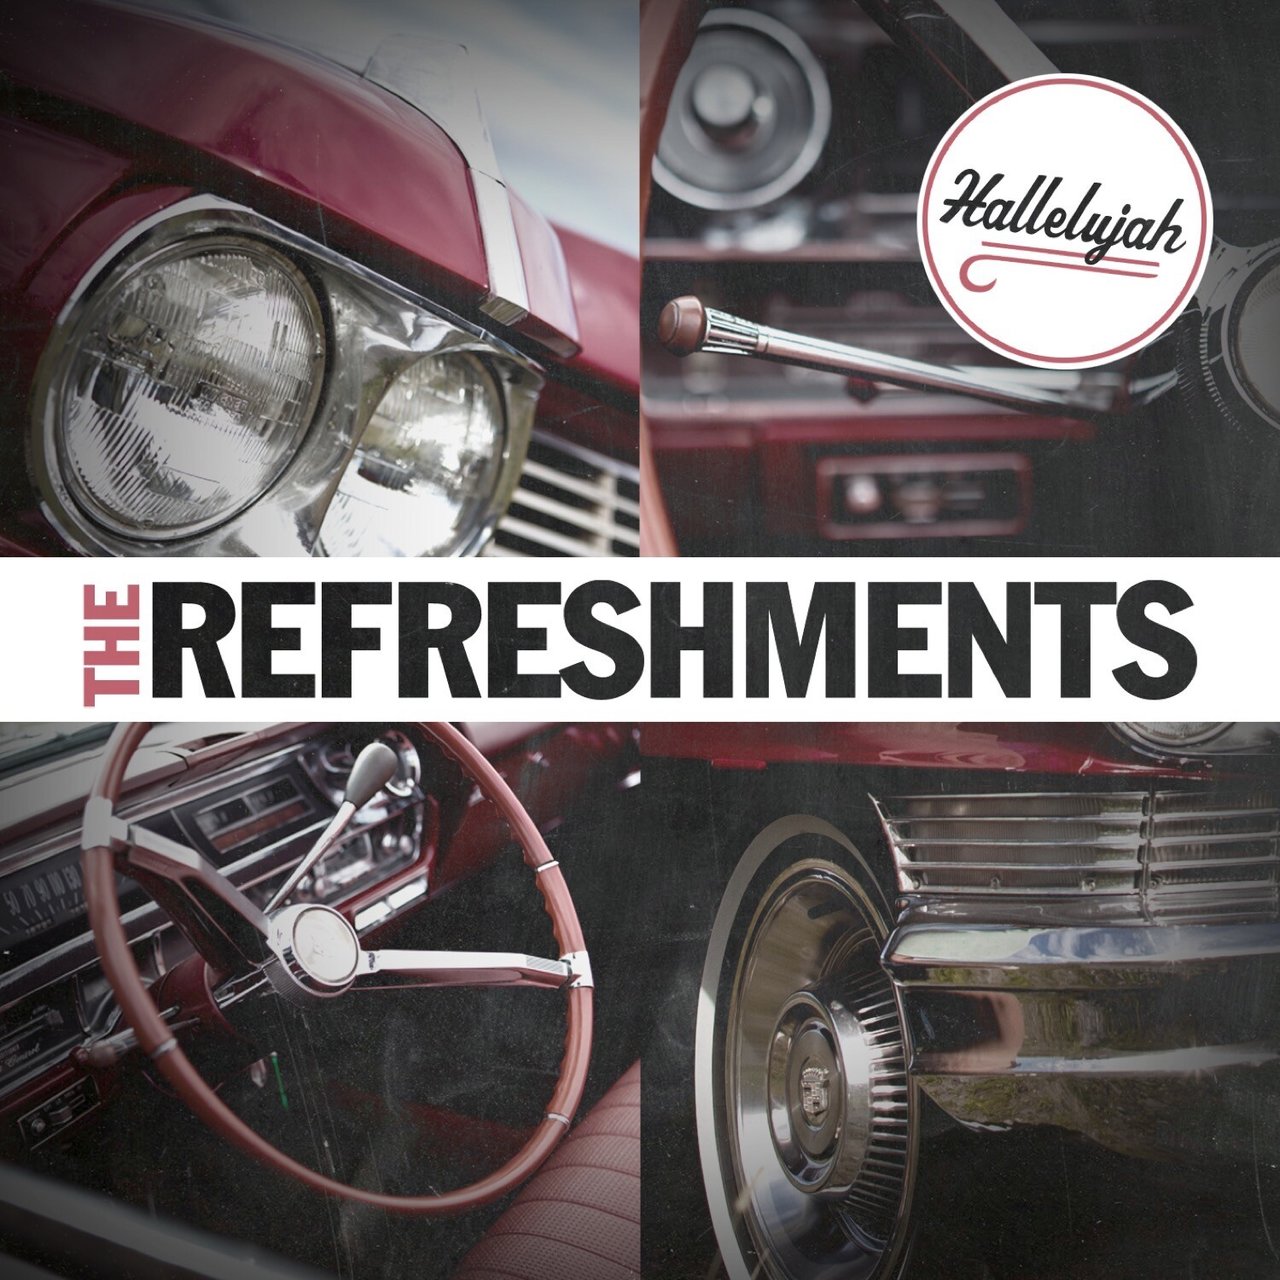 The Refreshments Hallelujah cover artwork